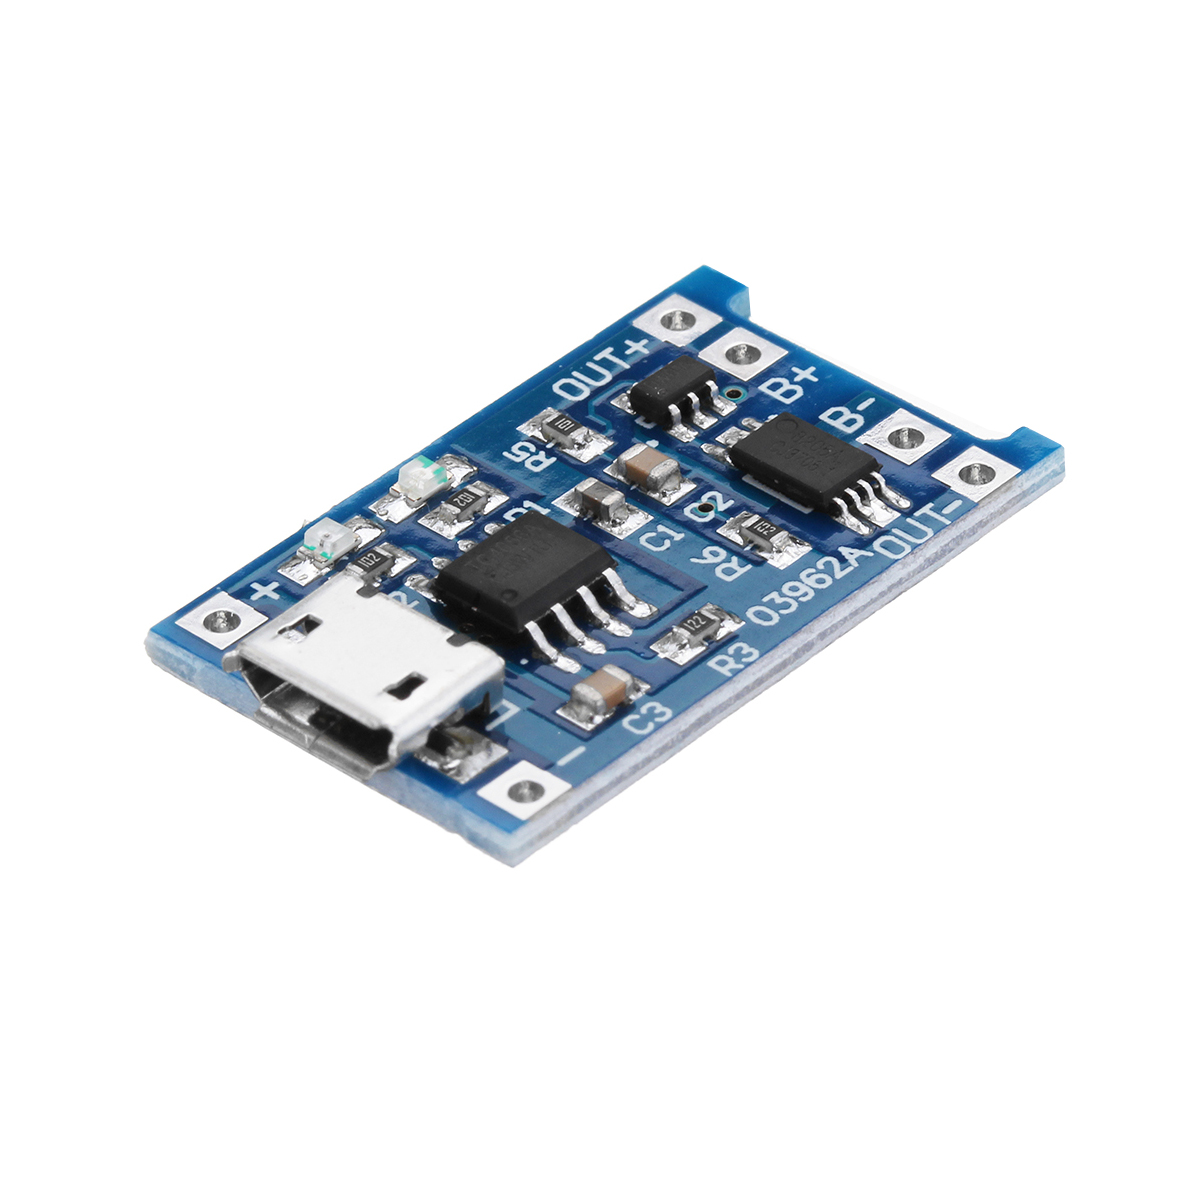 5V Micro USB 1A Lithium Battery Charging Board Lipo Charger Module for Arduino